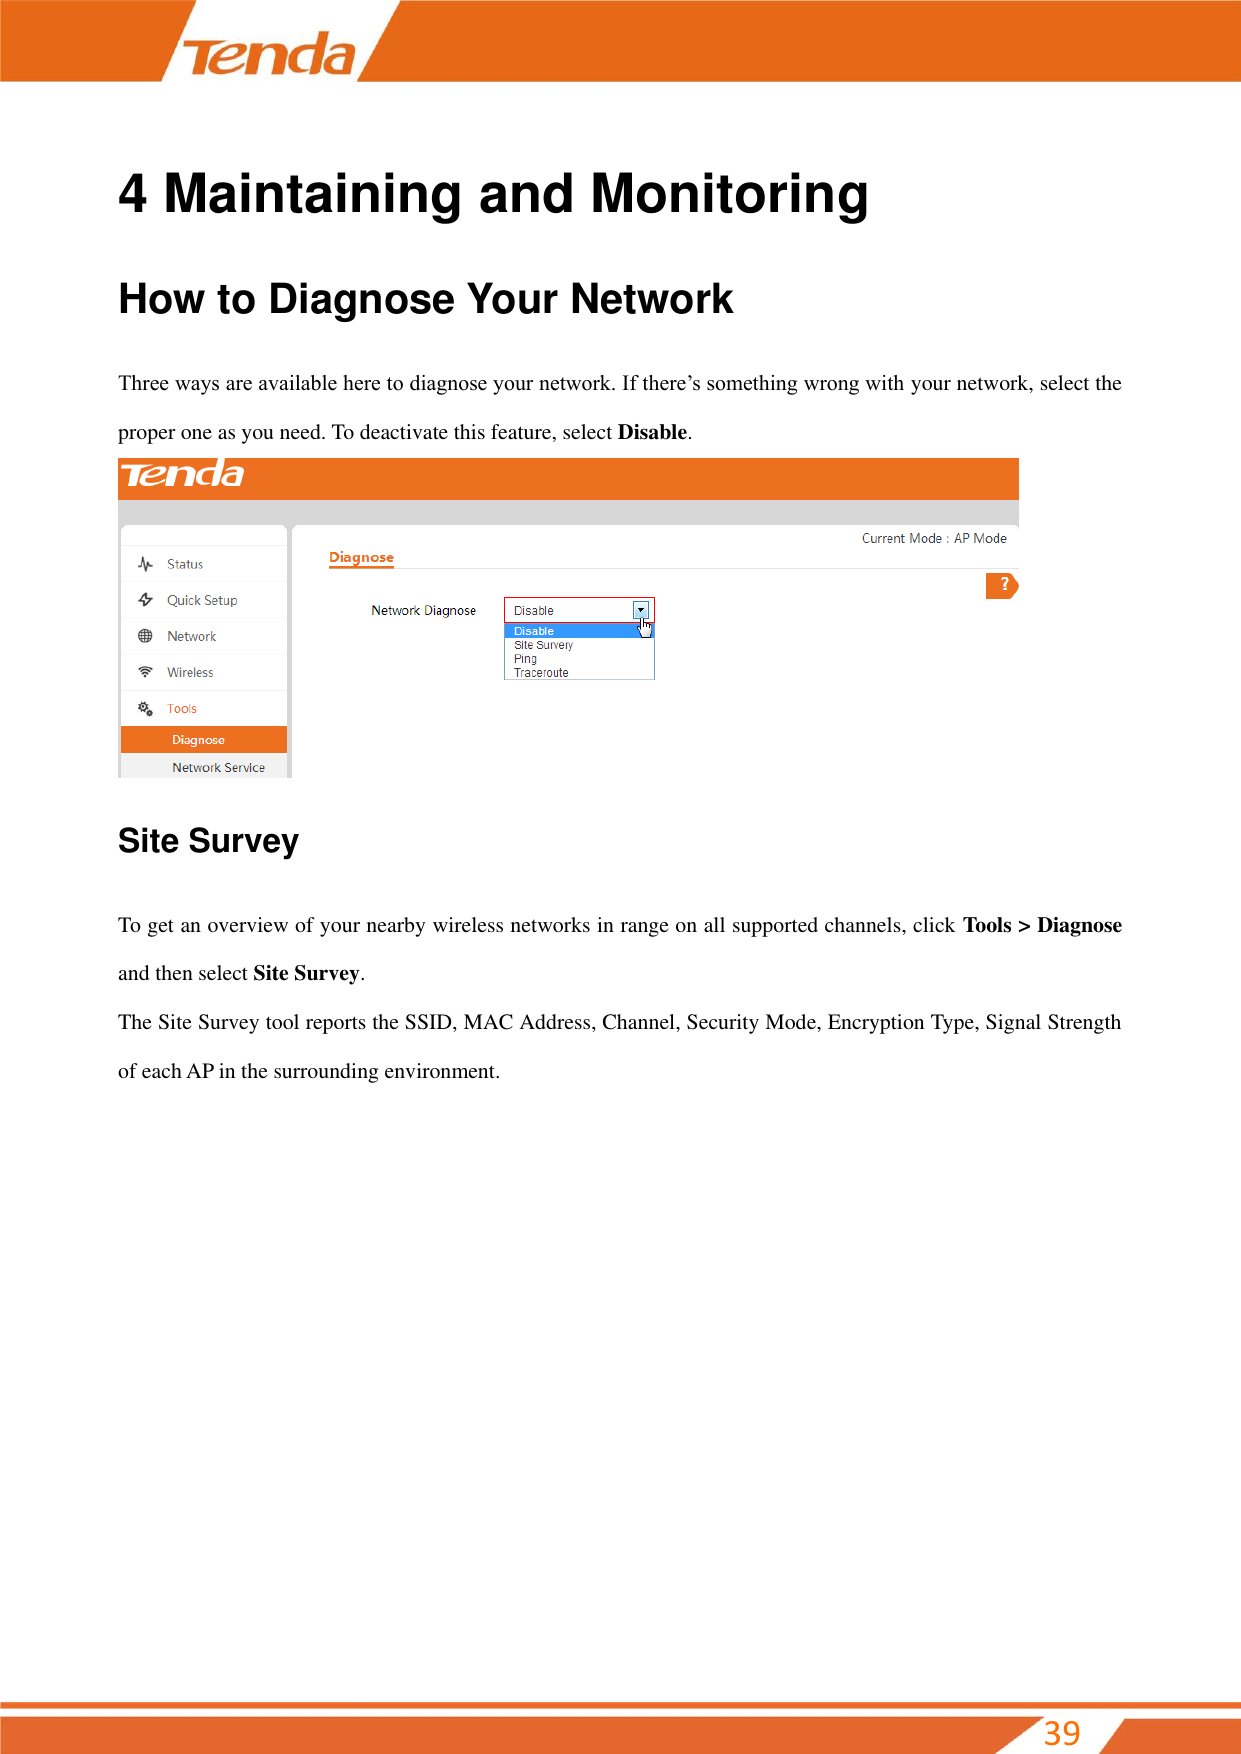         39 4 Maintaining and Monitoring How to Diagnose Your Network Three ways are available here to diagnose your network. If there’s something wrong with your network, select the proper one as you need. To deactivate this feature, select Disable.  Site Survey To get an overview of your nearby wireless networks in range on all supported channels, click Tools &gt; Diagnose and then select Site Survey.   The Site Survey tool reports the SSID, MAC Address, Channel, Security Mode, Encryption Type, Signal Strength of each AP in the surrounding environment. 